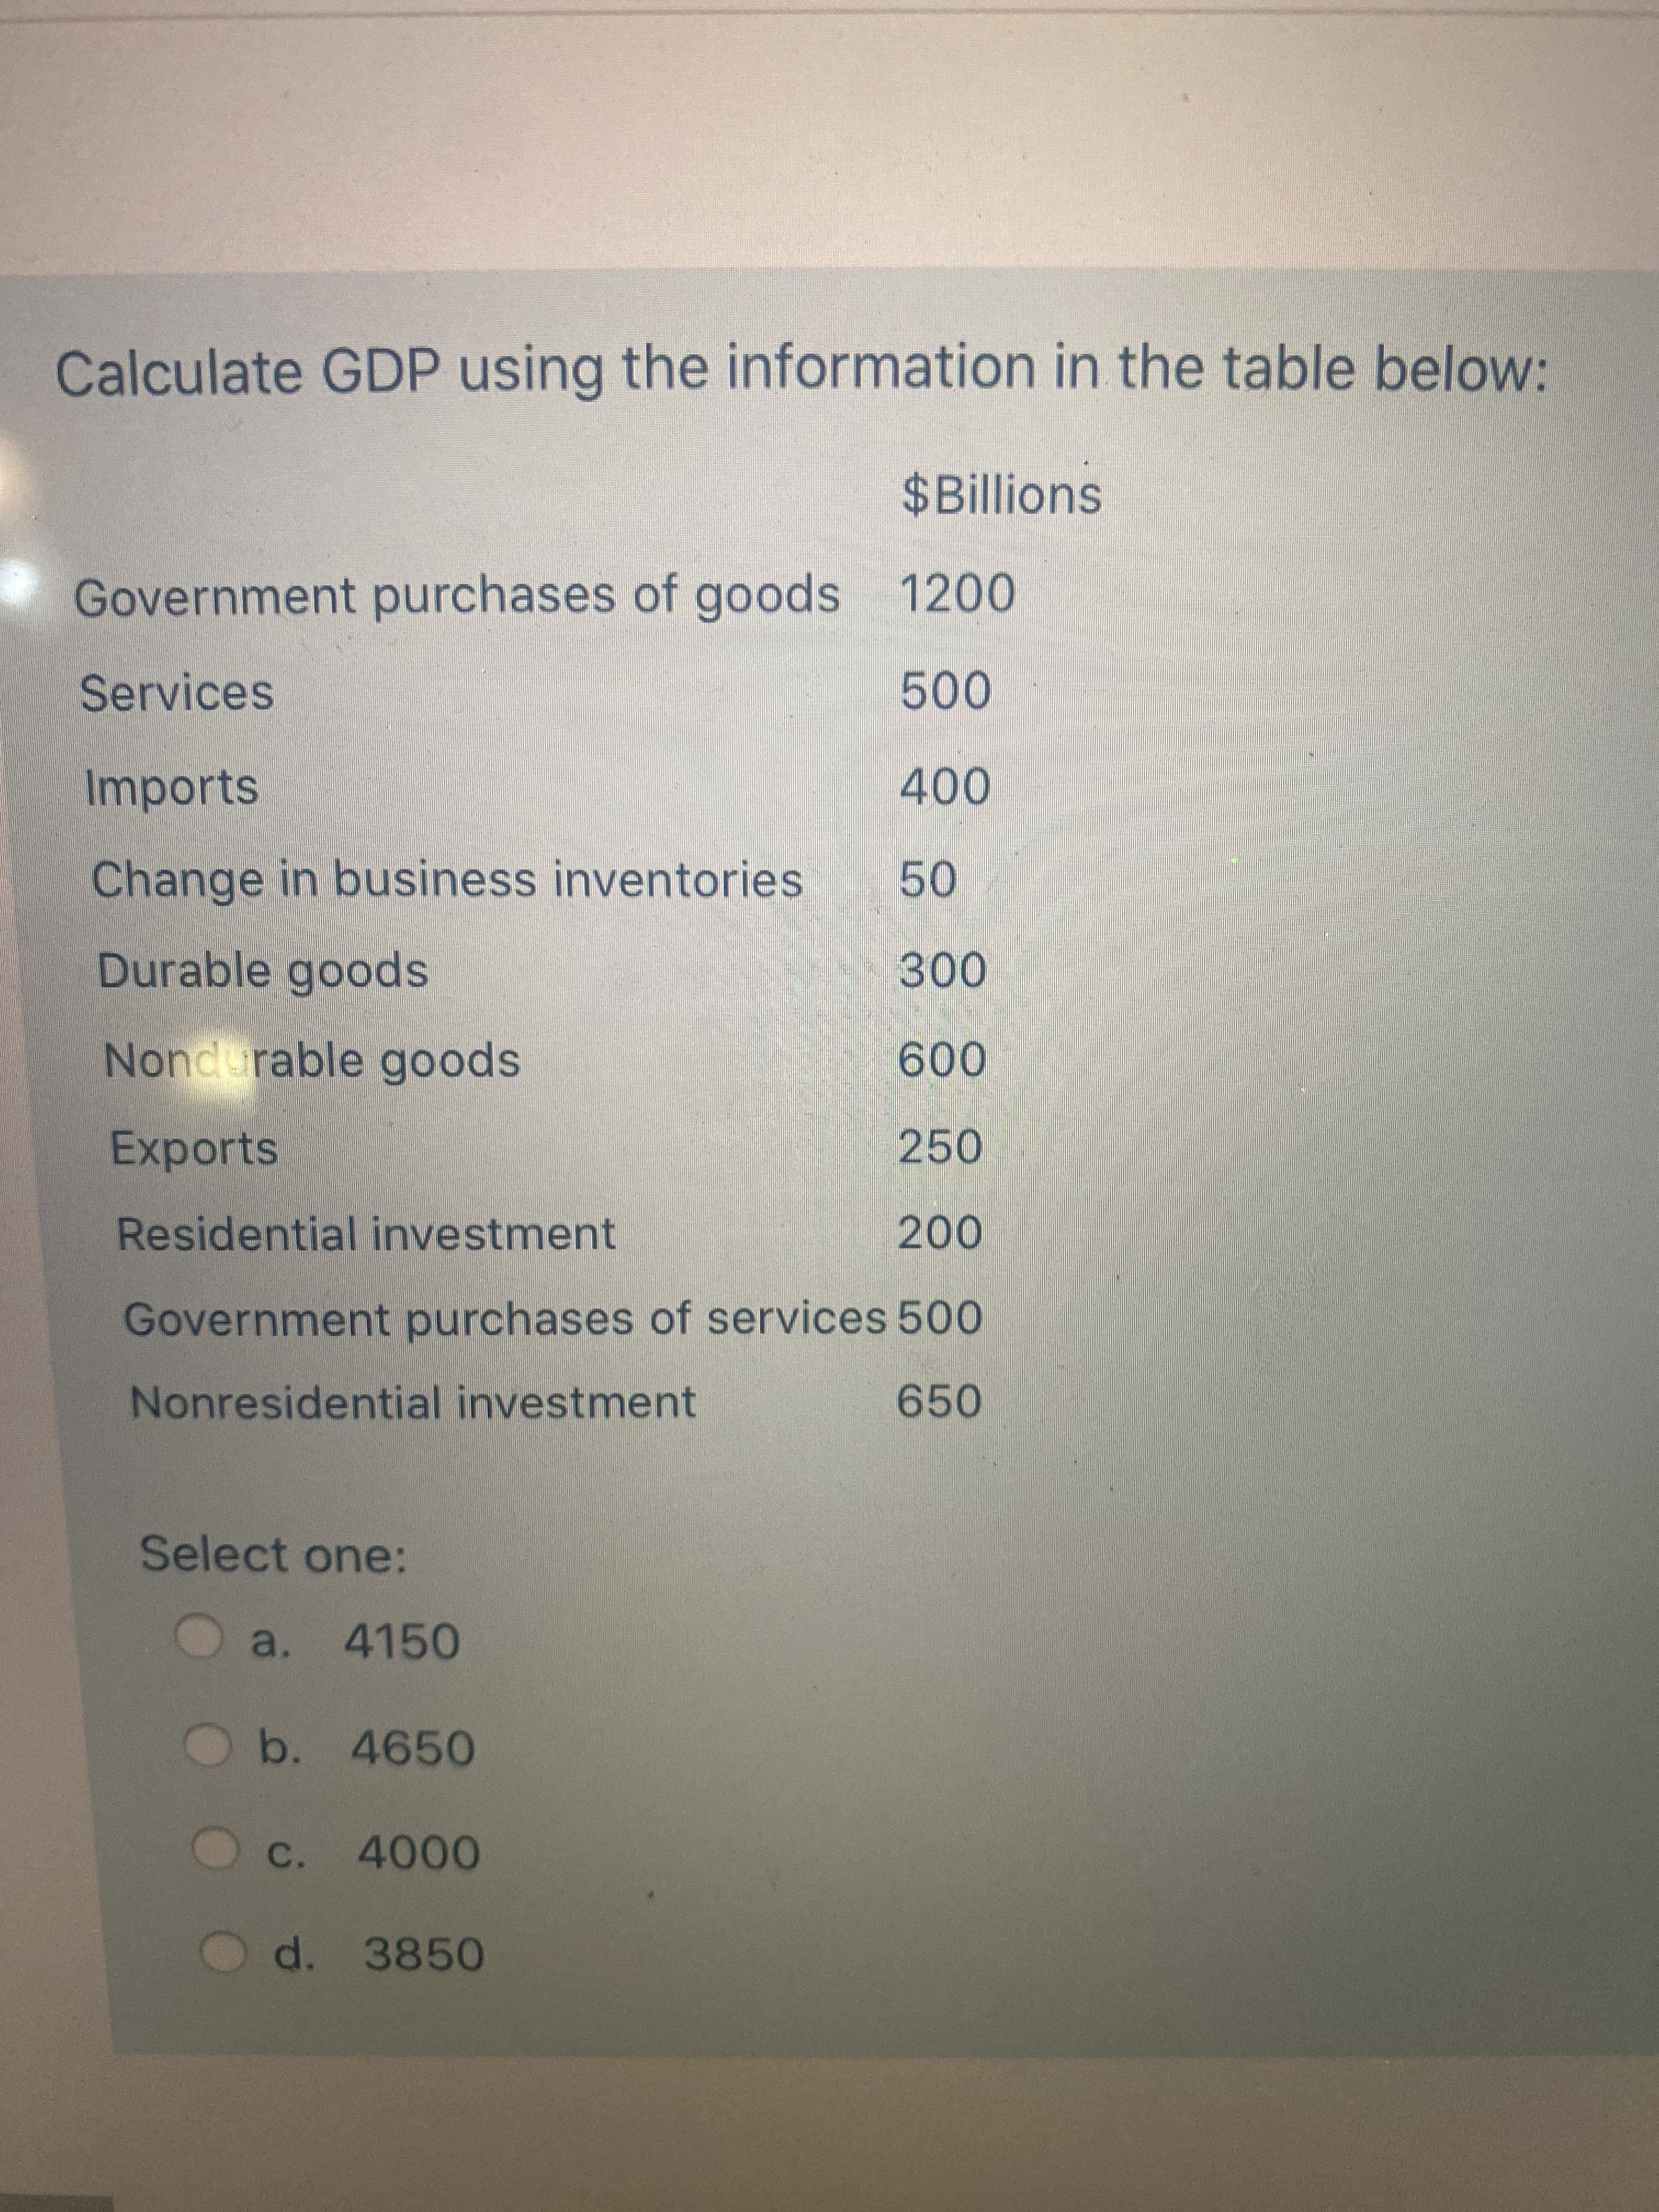 Calculate GDP using the information in the table below:
$ Billions
Government purchases of goods 1200
Services
Imports
Change in business inventories
50
Durable goods
Nondurable goods
009
250
Exports
Residential investment
Government purchases of services 50O
Nonresidential investment
650
Select one:
a. 4150
b. 4650
C. 4000
O d. 3850
